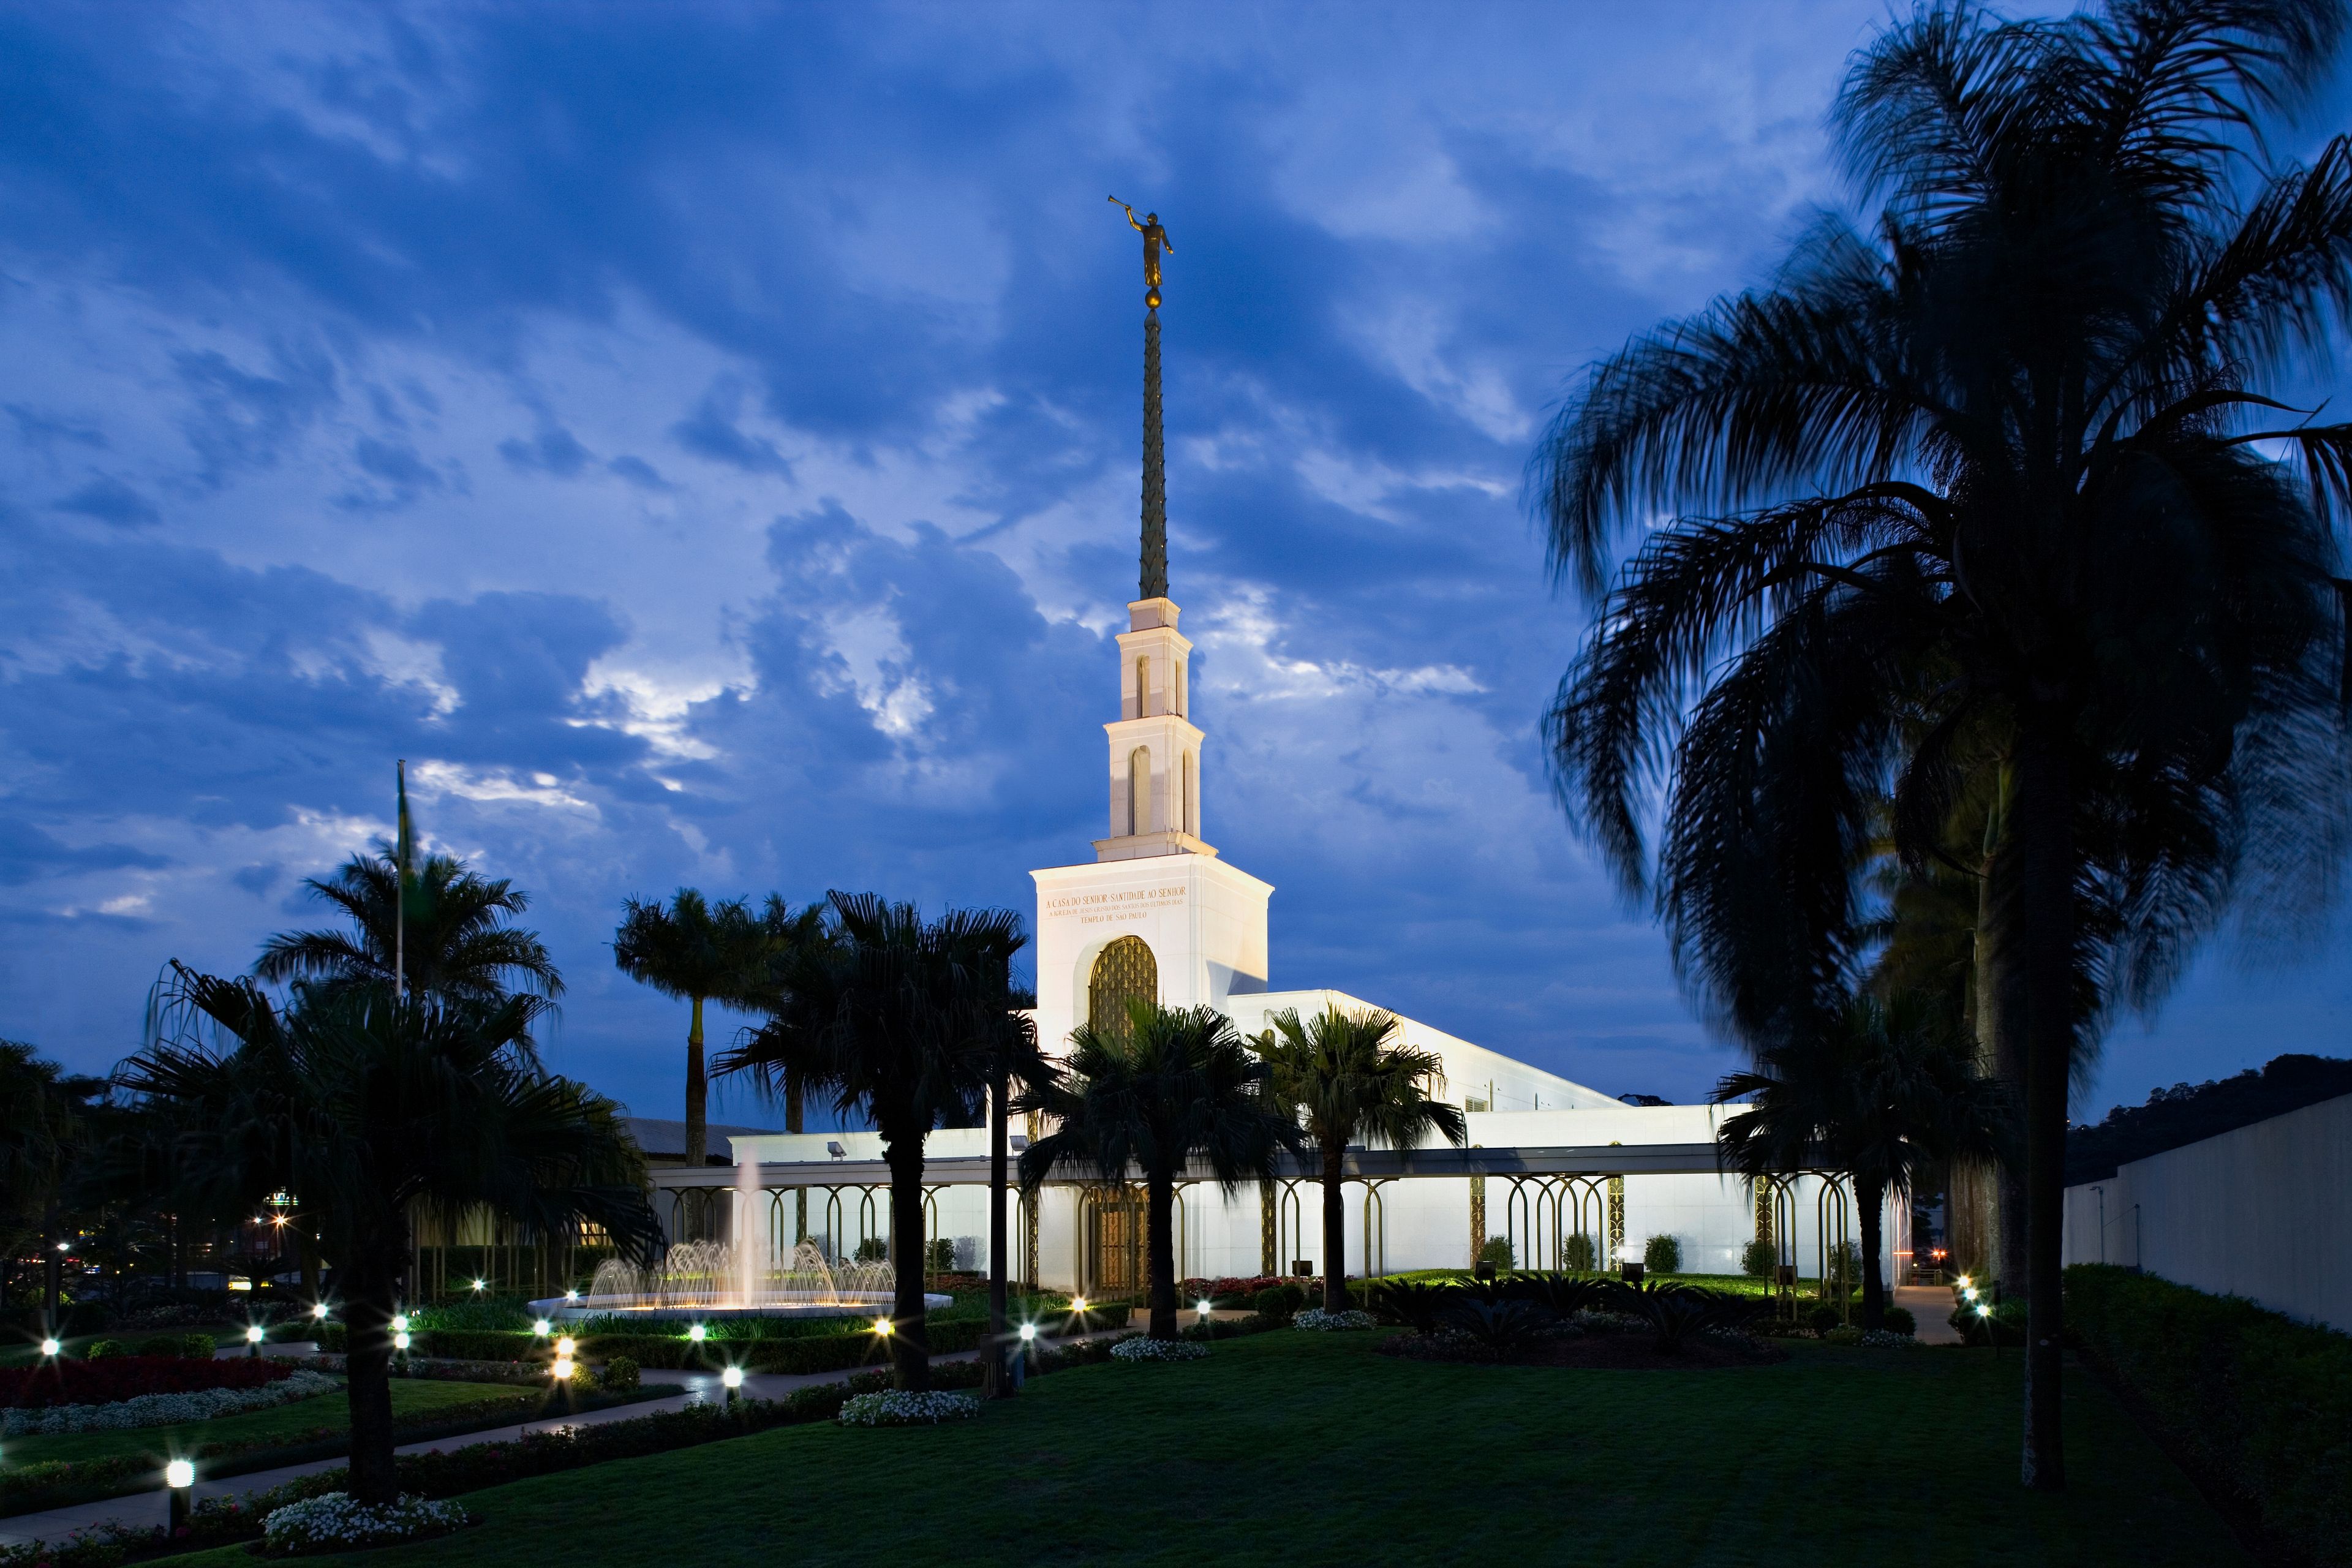 The São Paulo Brazil Temple in the evening, including the entrance and scenery.  